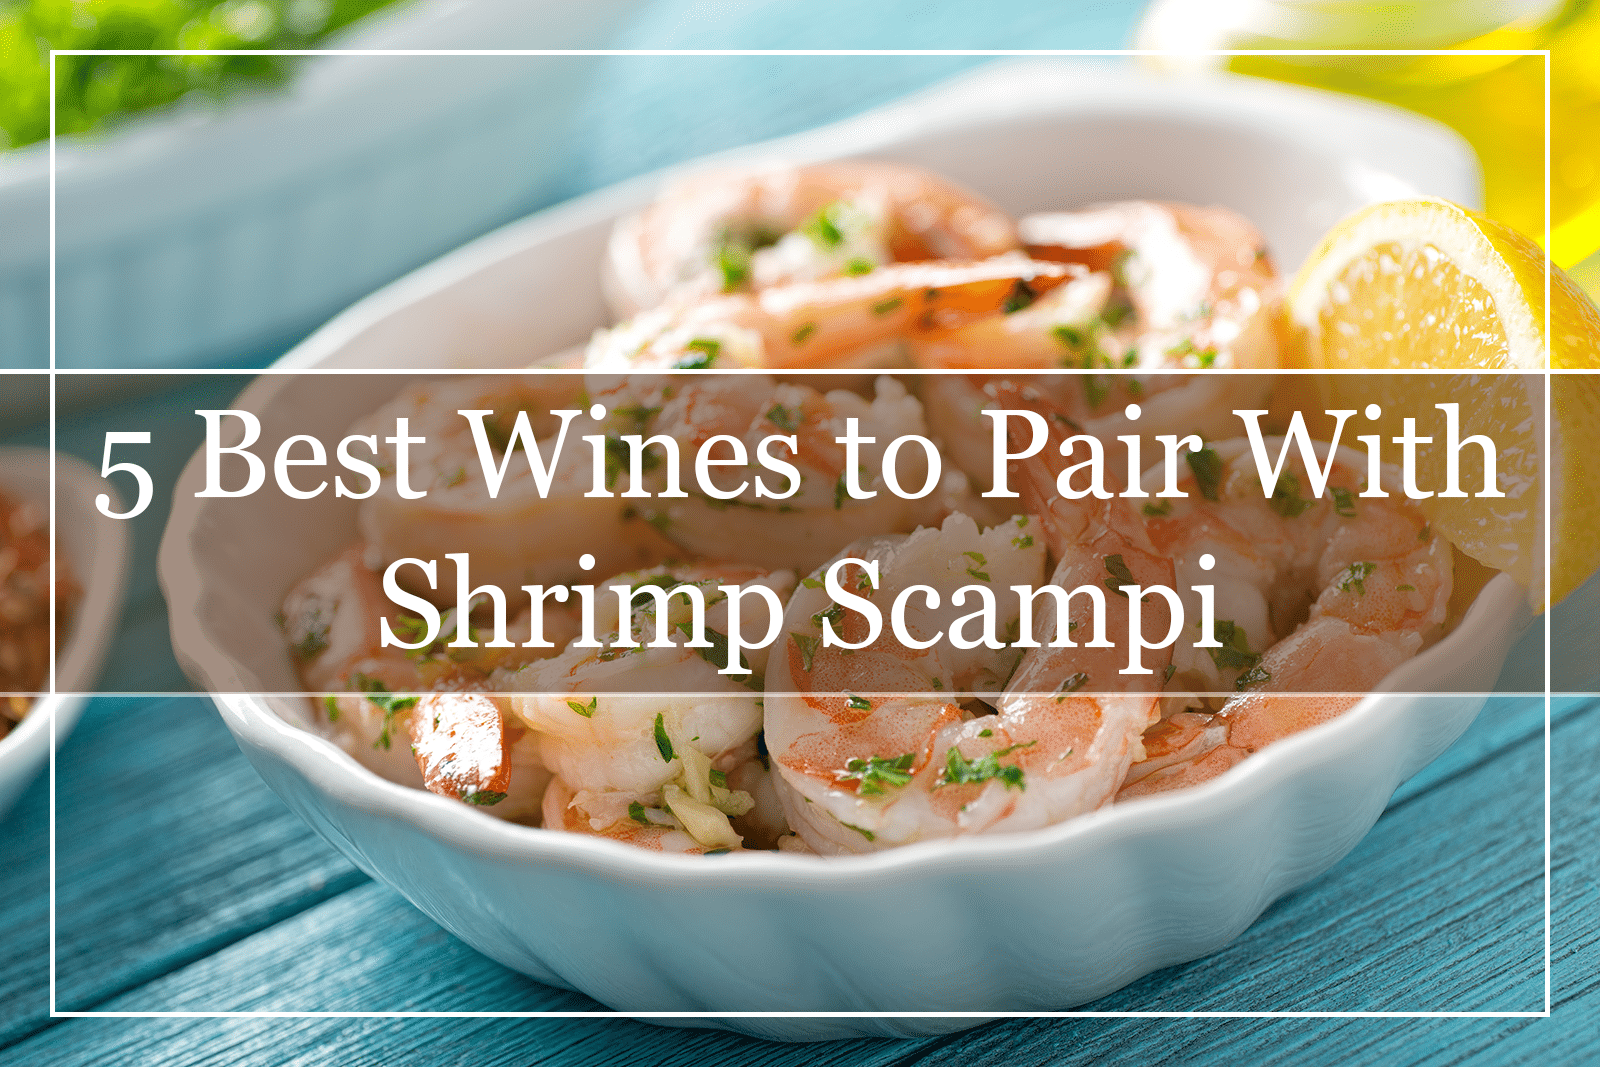 5 Best White Wines to Pair With Shrimp Scampi (2021)